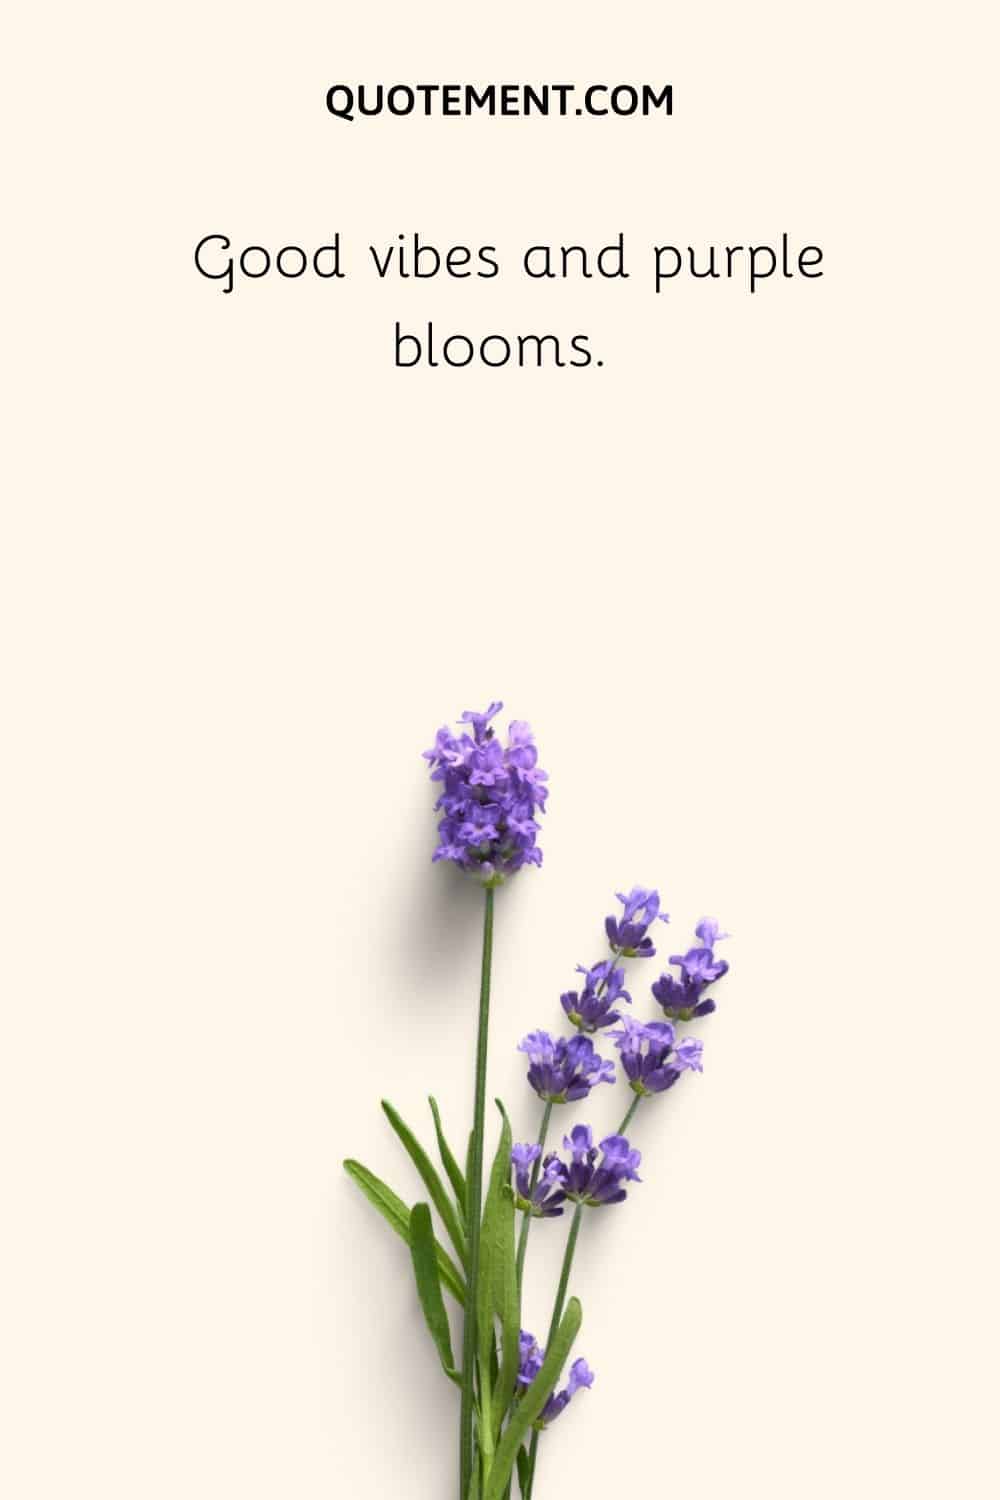 Good vibes and purple blooms